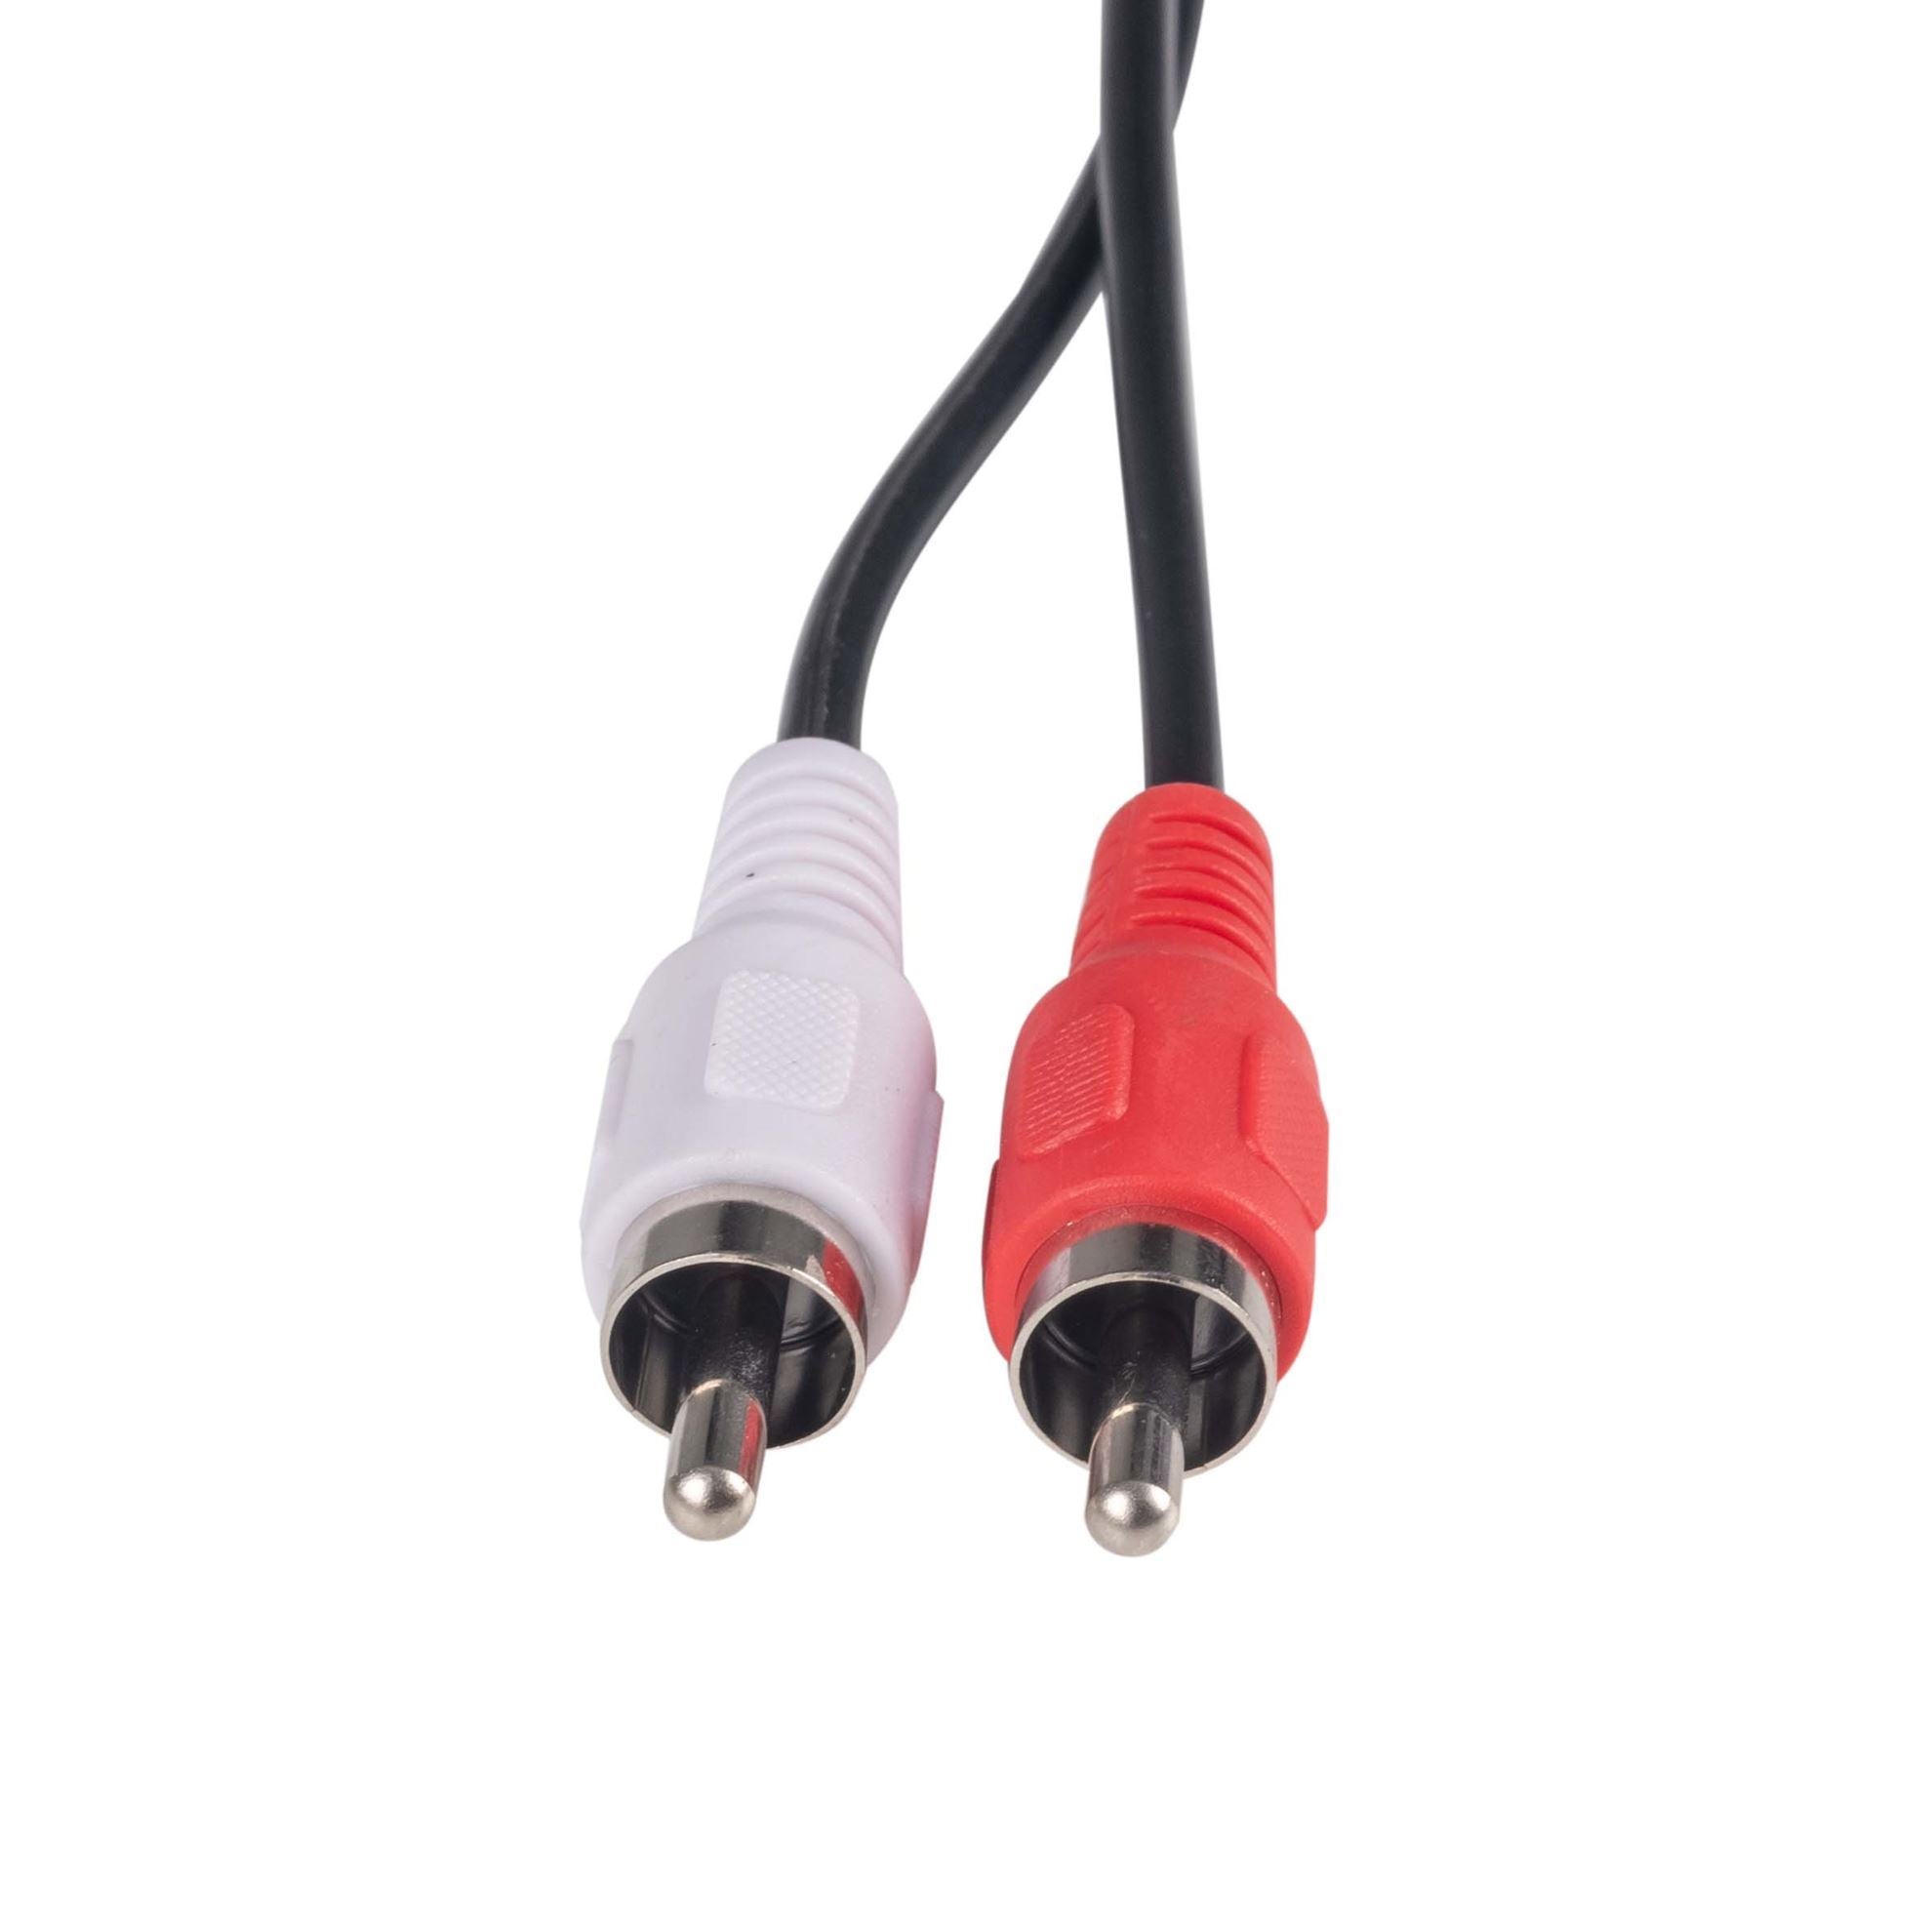 DYNAMIX_5m_RCA_Audio_Cable_2_RCA_to_2_RCA_Plugs,_Coloured_Red_&_White 399